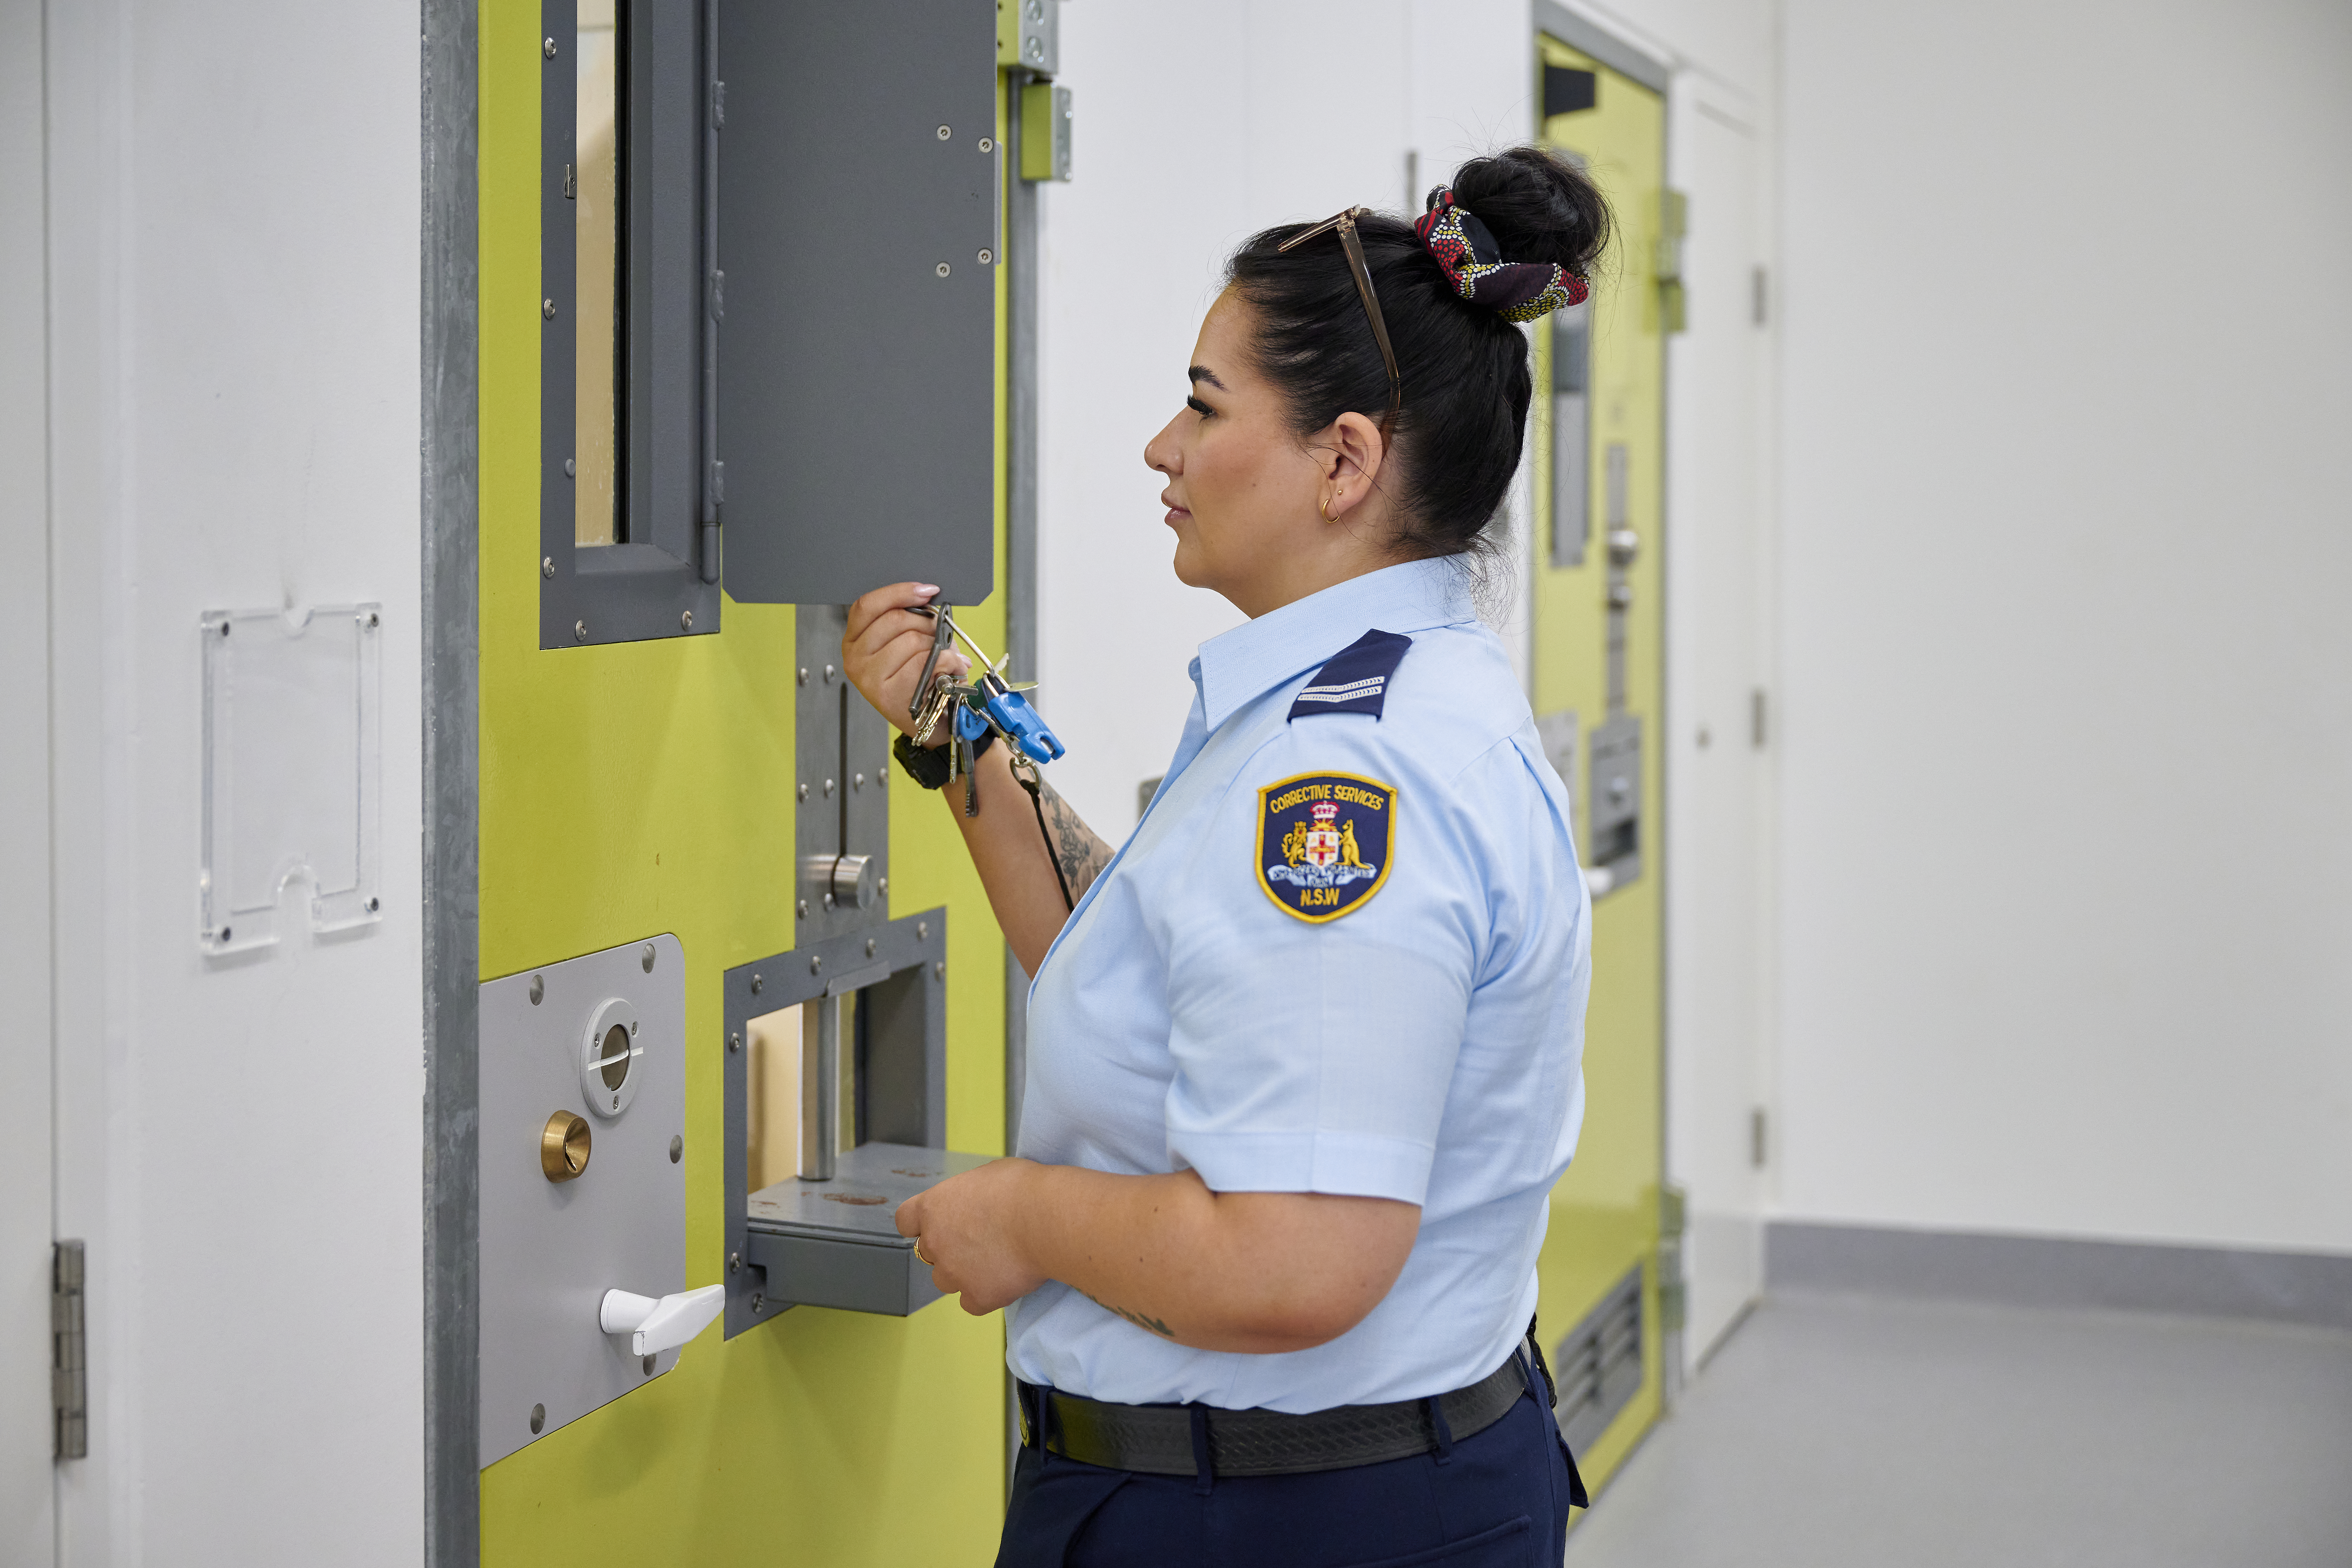 An image of a female Correctional Officer checking a cell